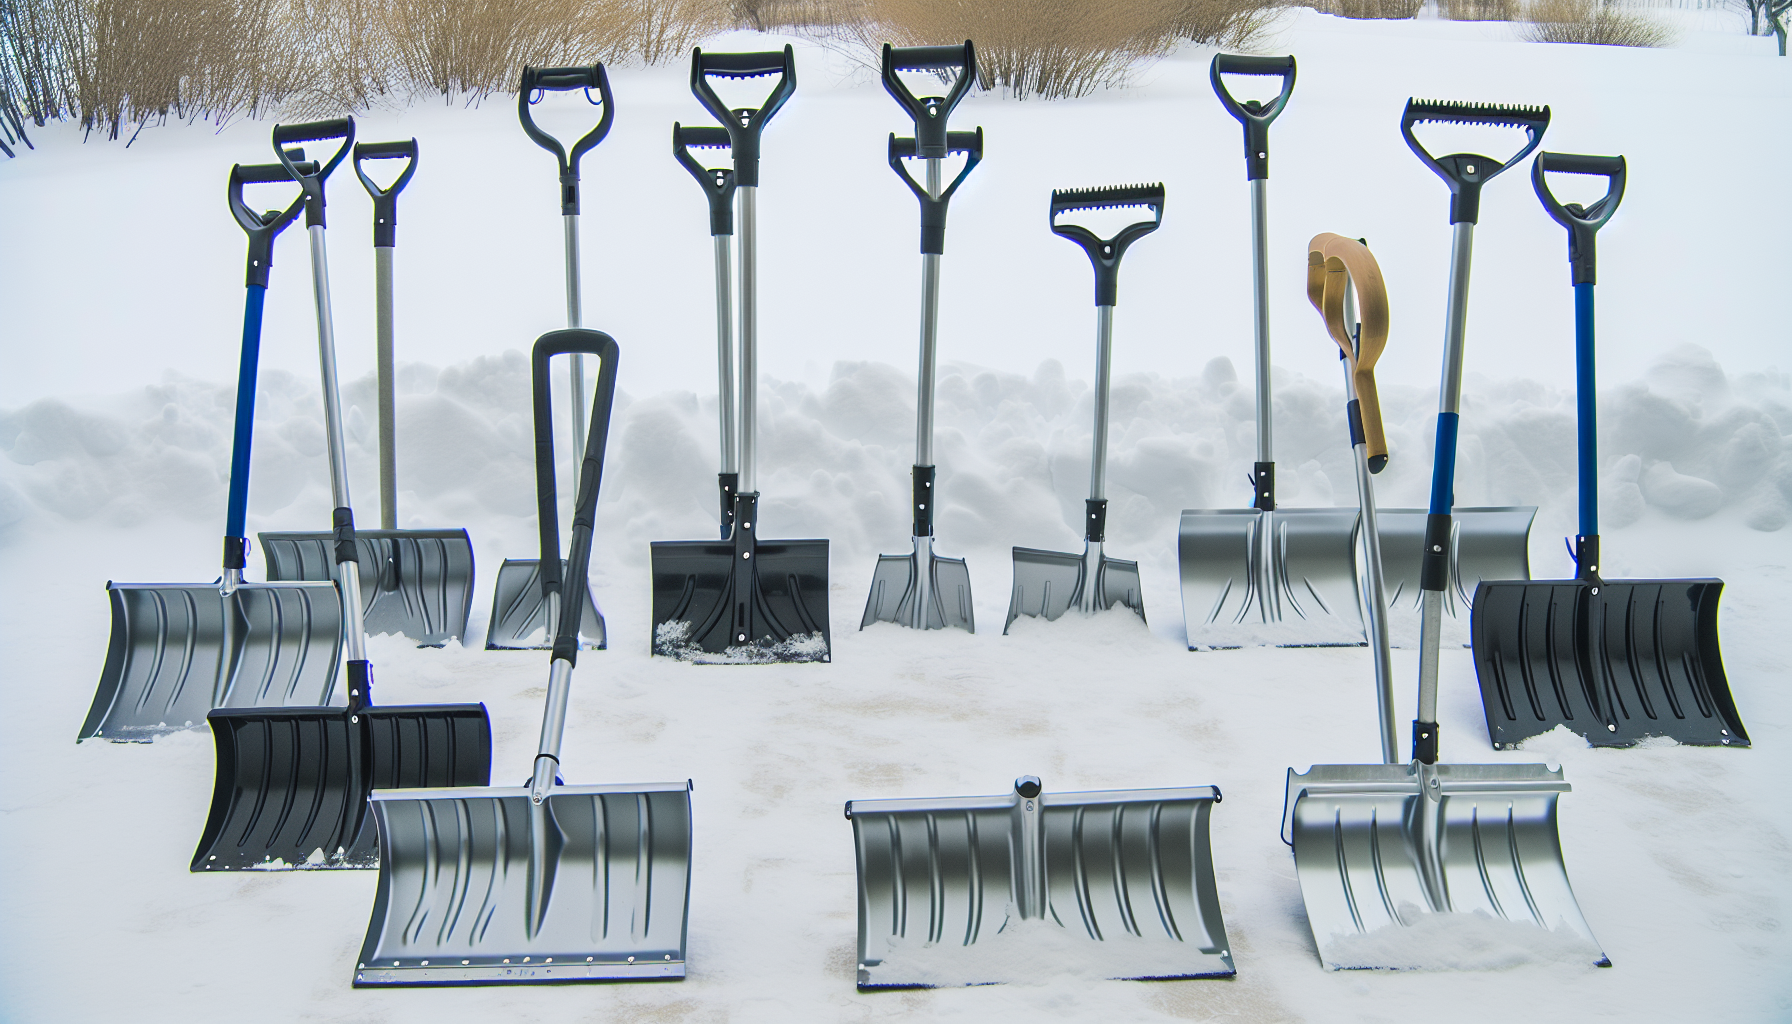 Different types of snow shovels